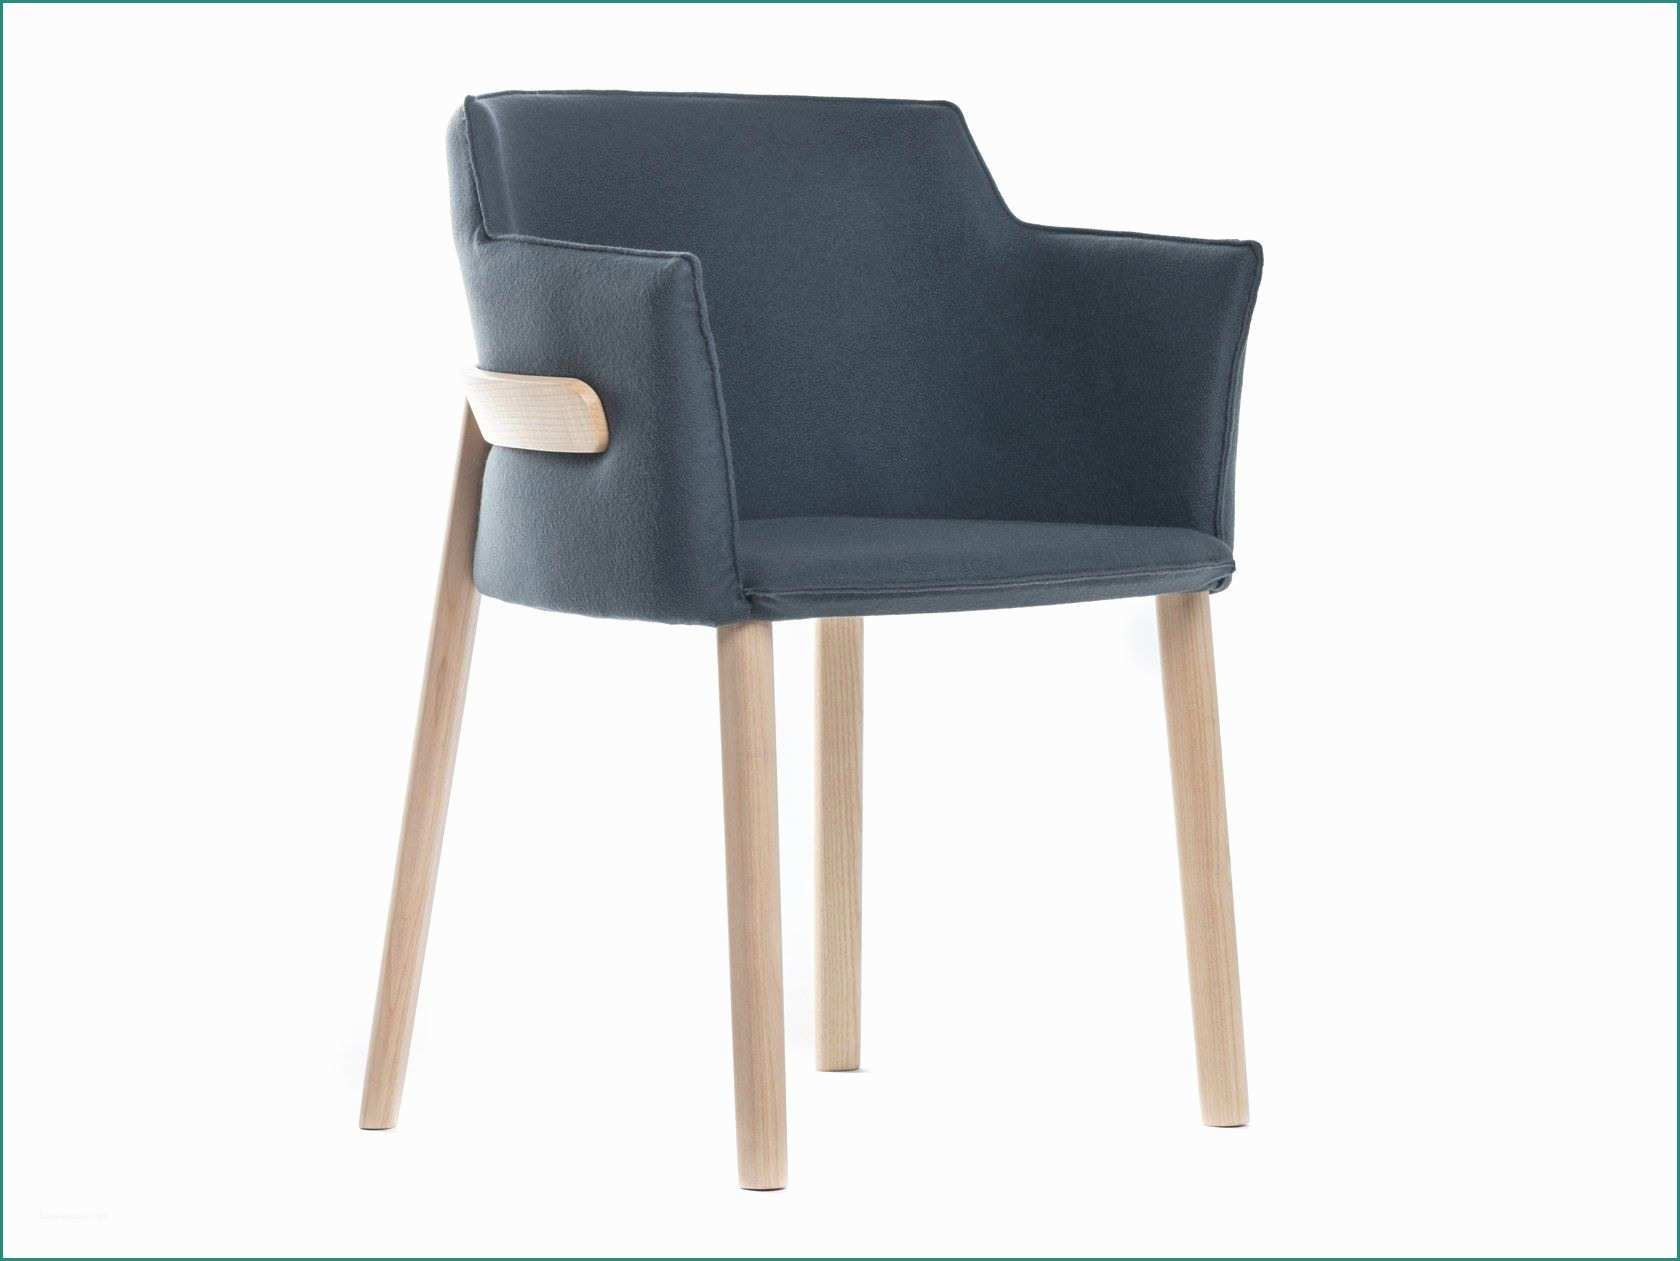 Upholstered fabric chair with armrests PINCE by Wiener GTV Design